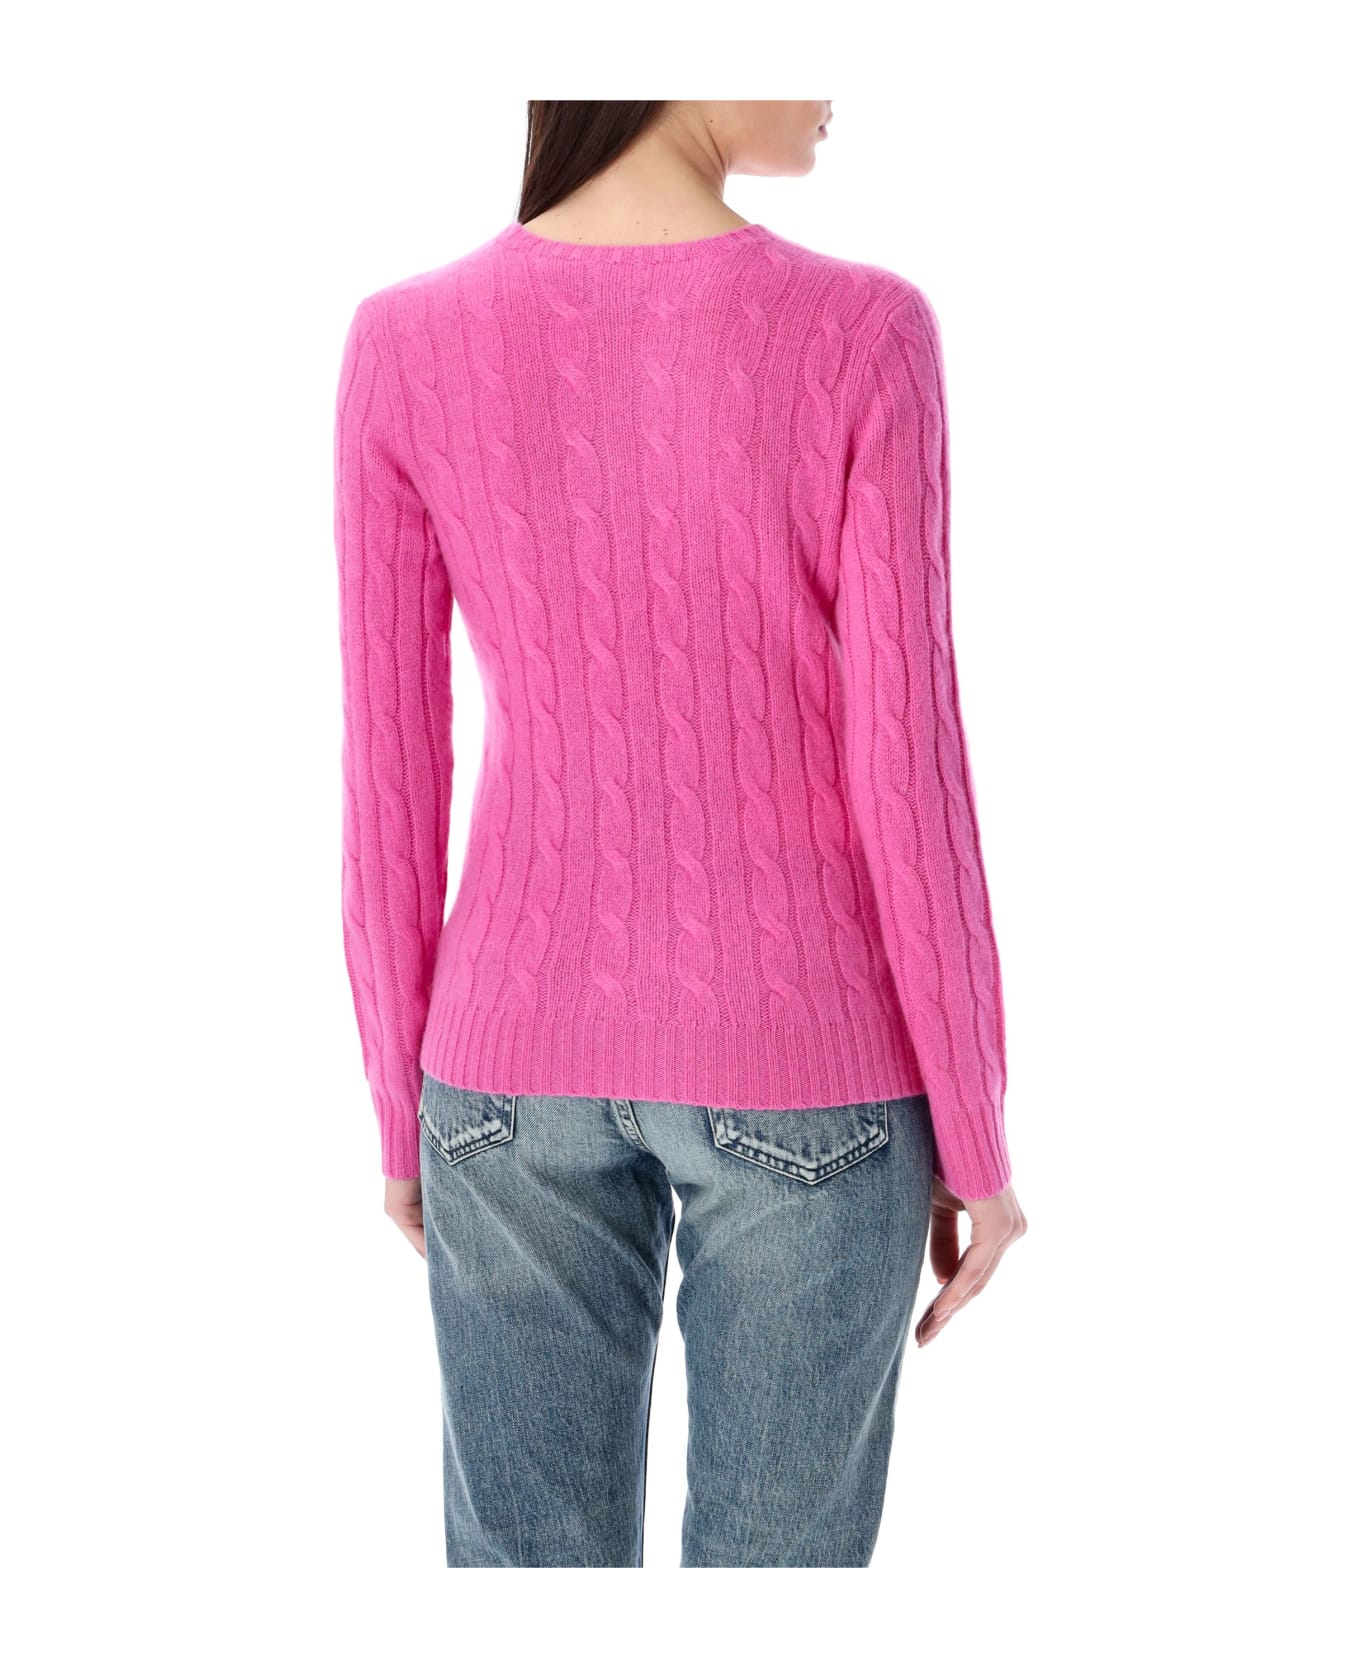 Polo Ralph Lauren Julianna Cable Knit Sweater - PINK FUXIA ニットウェア